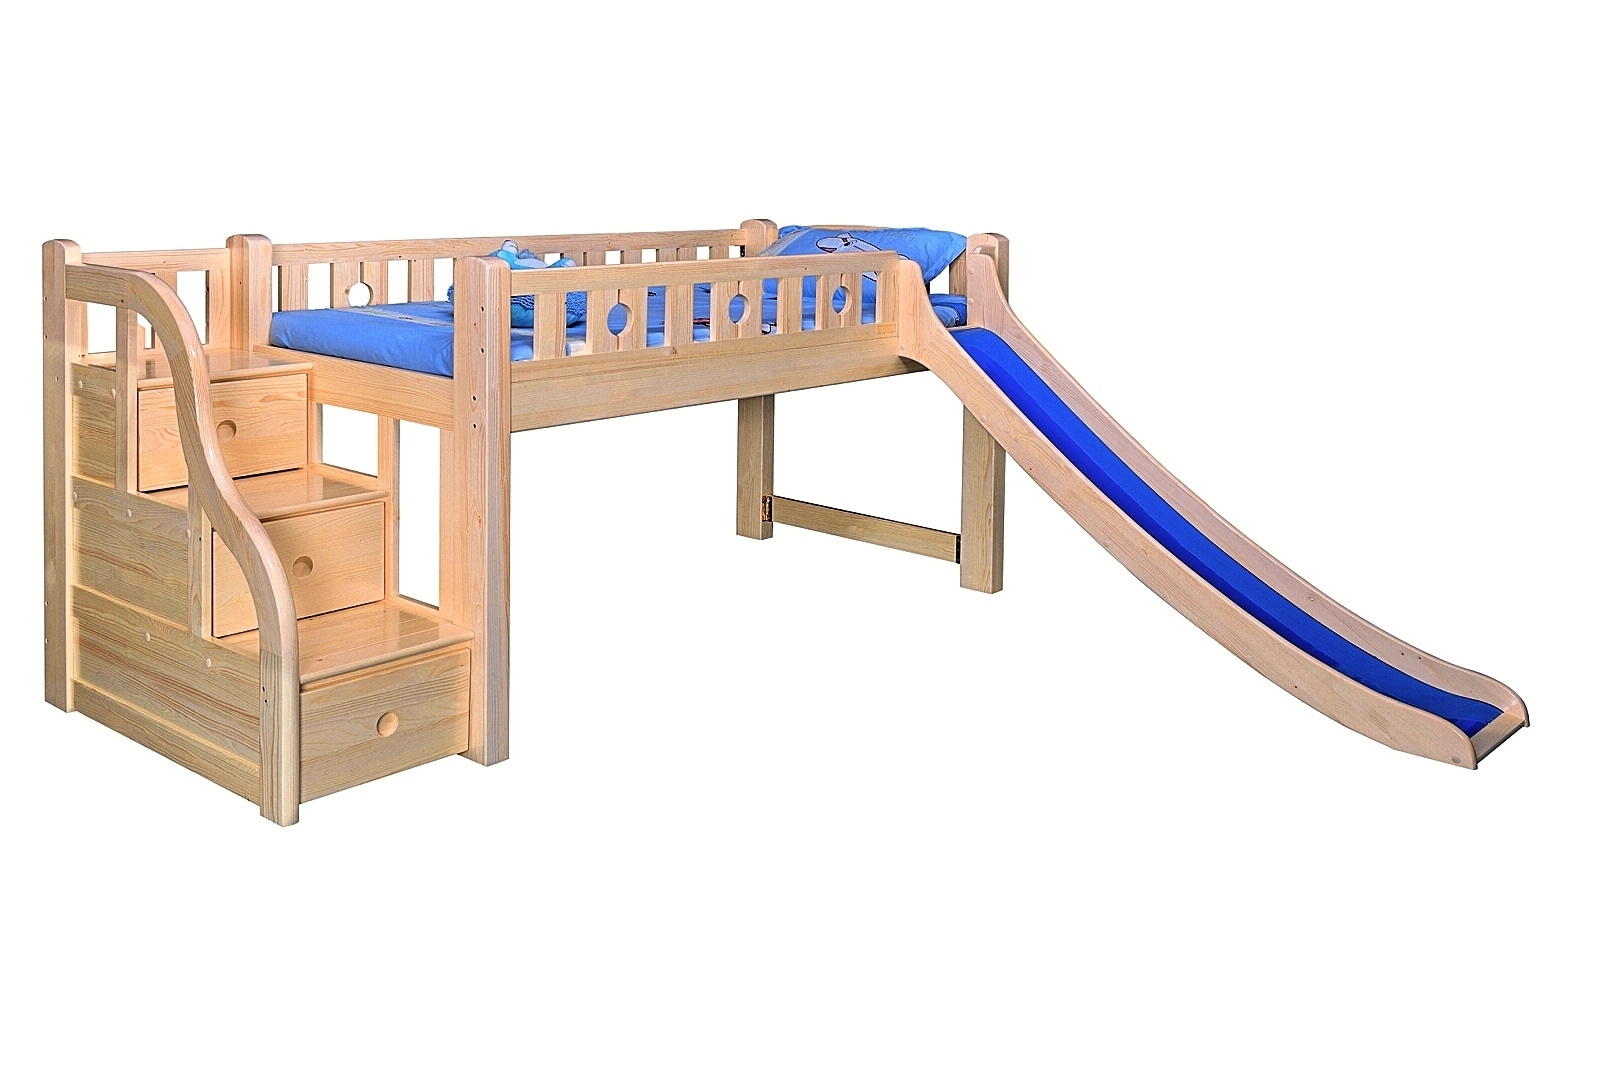 Timber Bunk Bed With Blue Slide, A Bunk Bed With A Slide